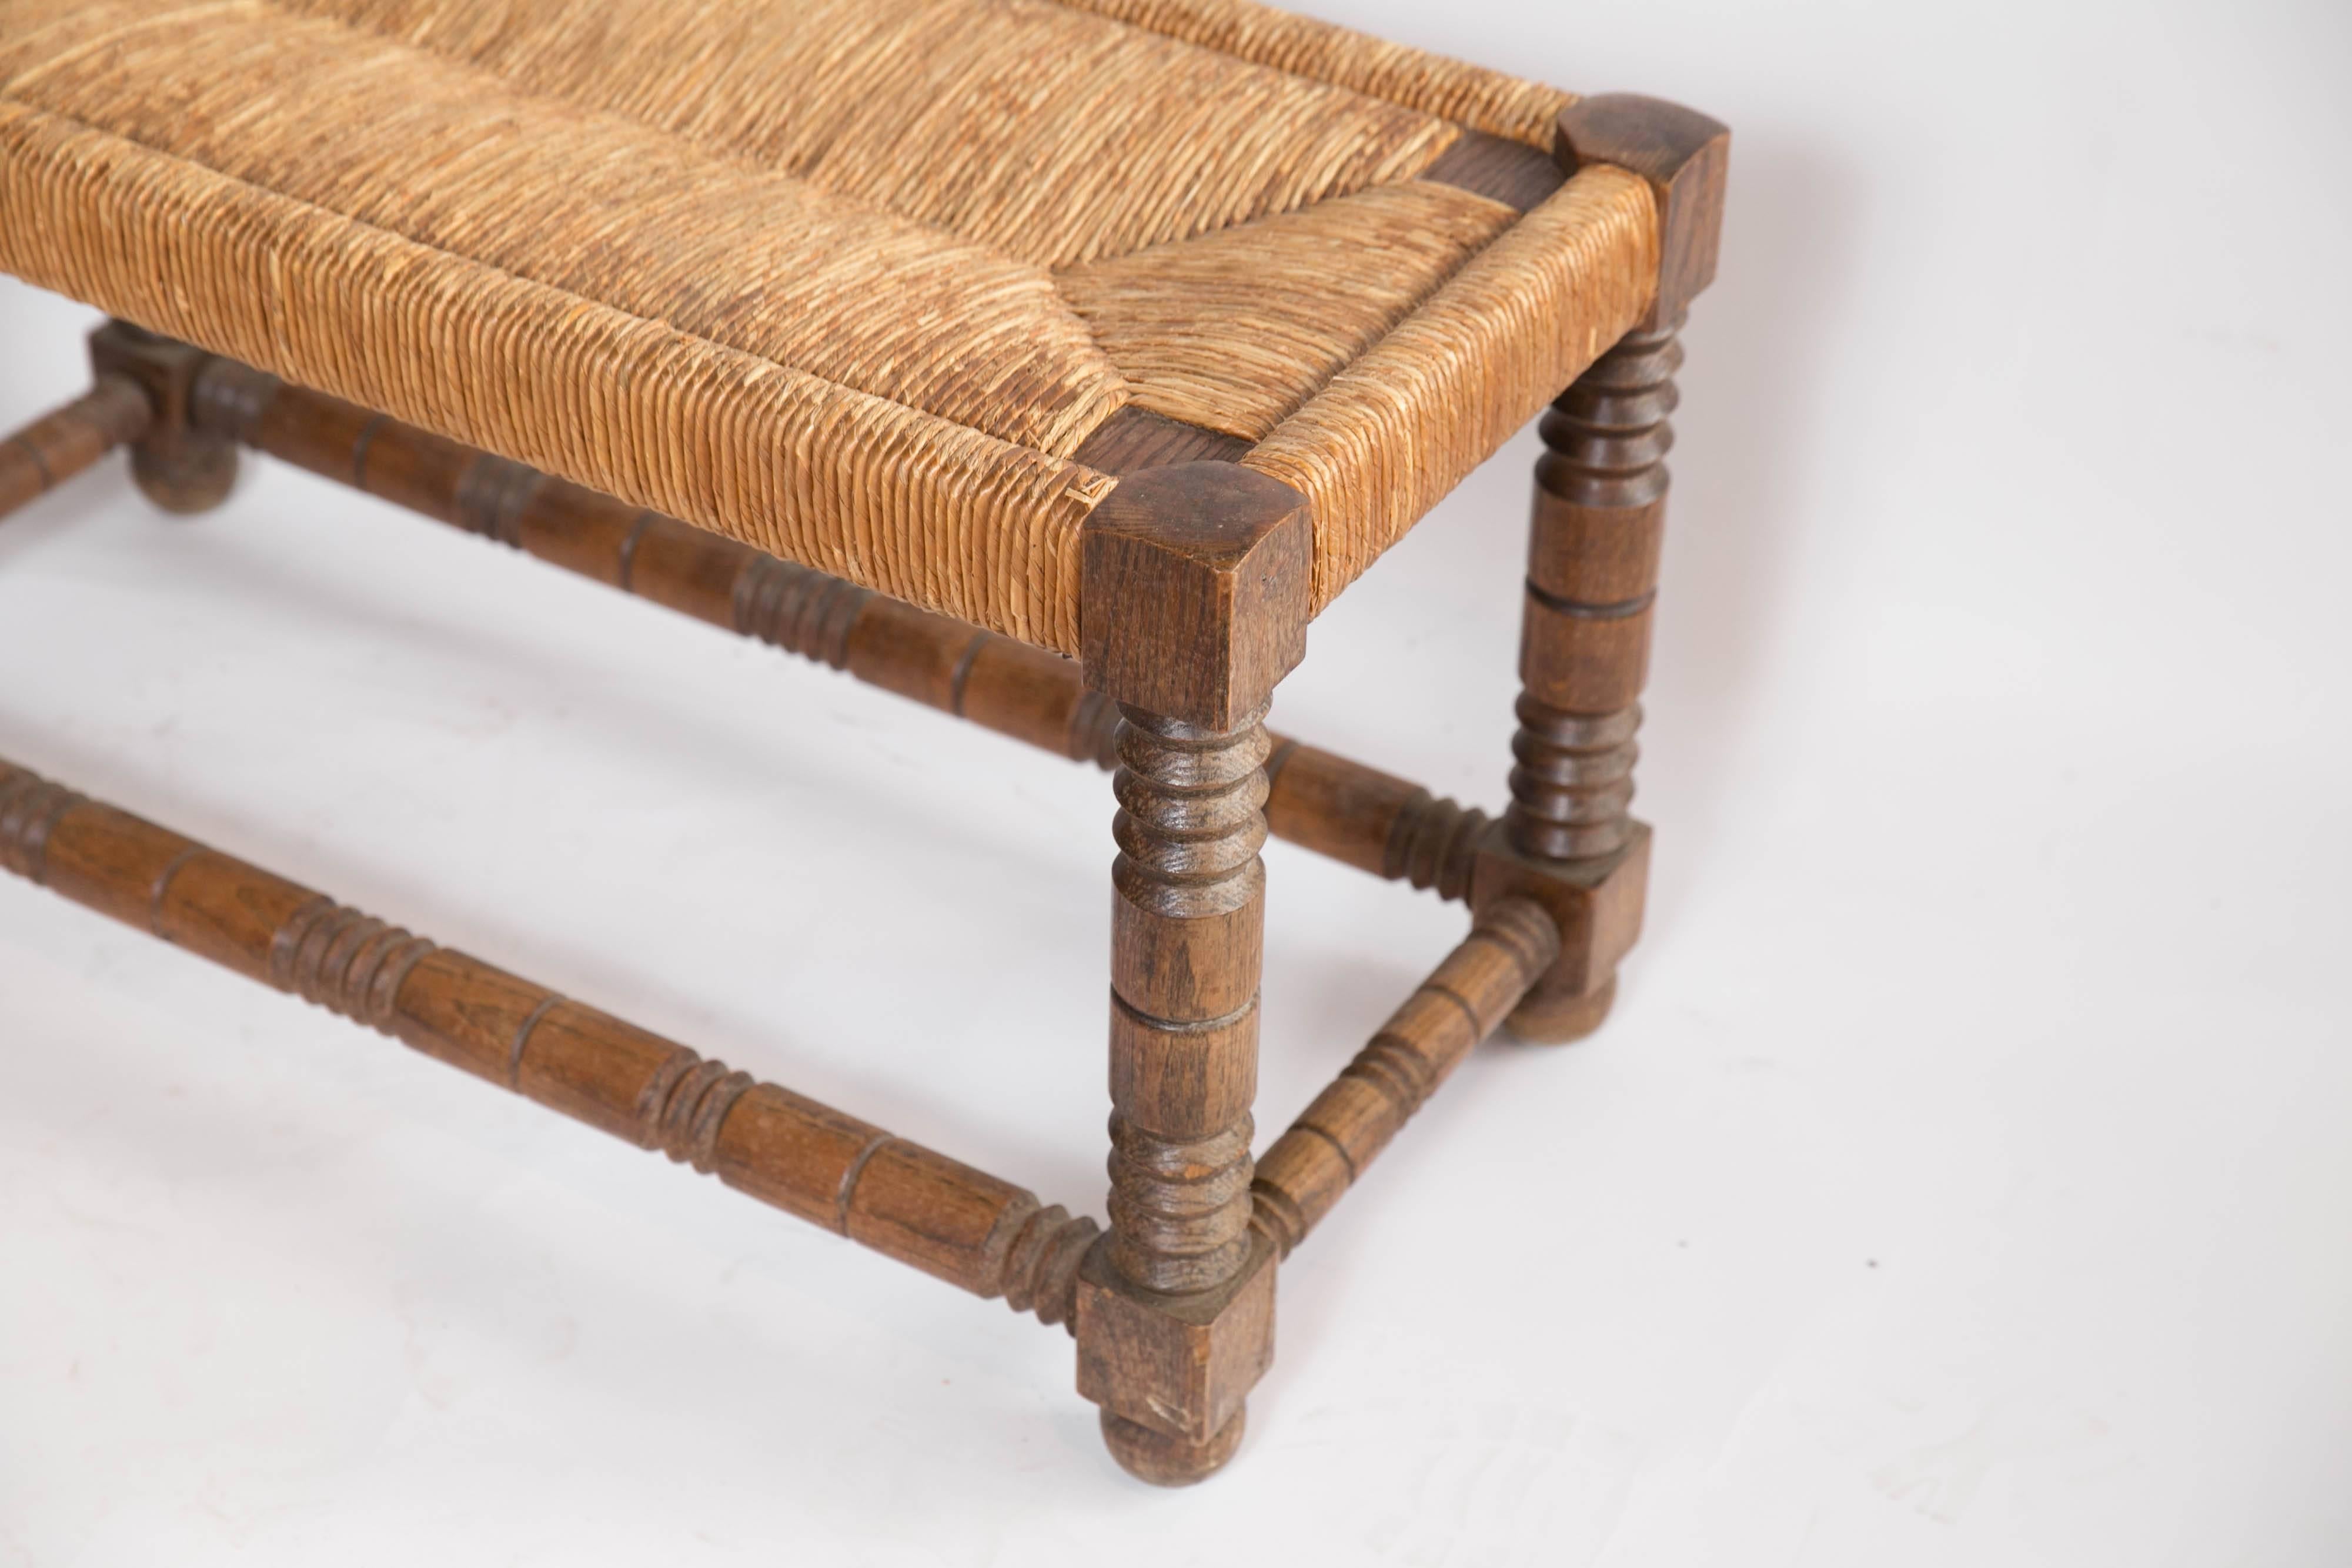 With a nod towards Jacobean styling, a striking rush seat bench from France. Heavy and solid with beautifully turned legs and stretcher bars supporting a rush seat in immaculate condition.